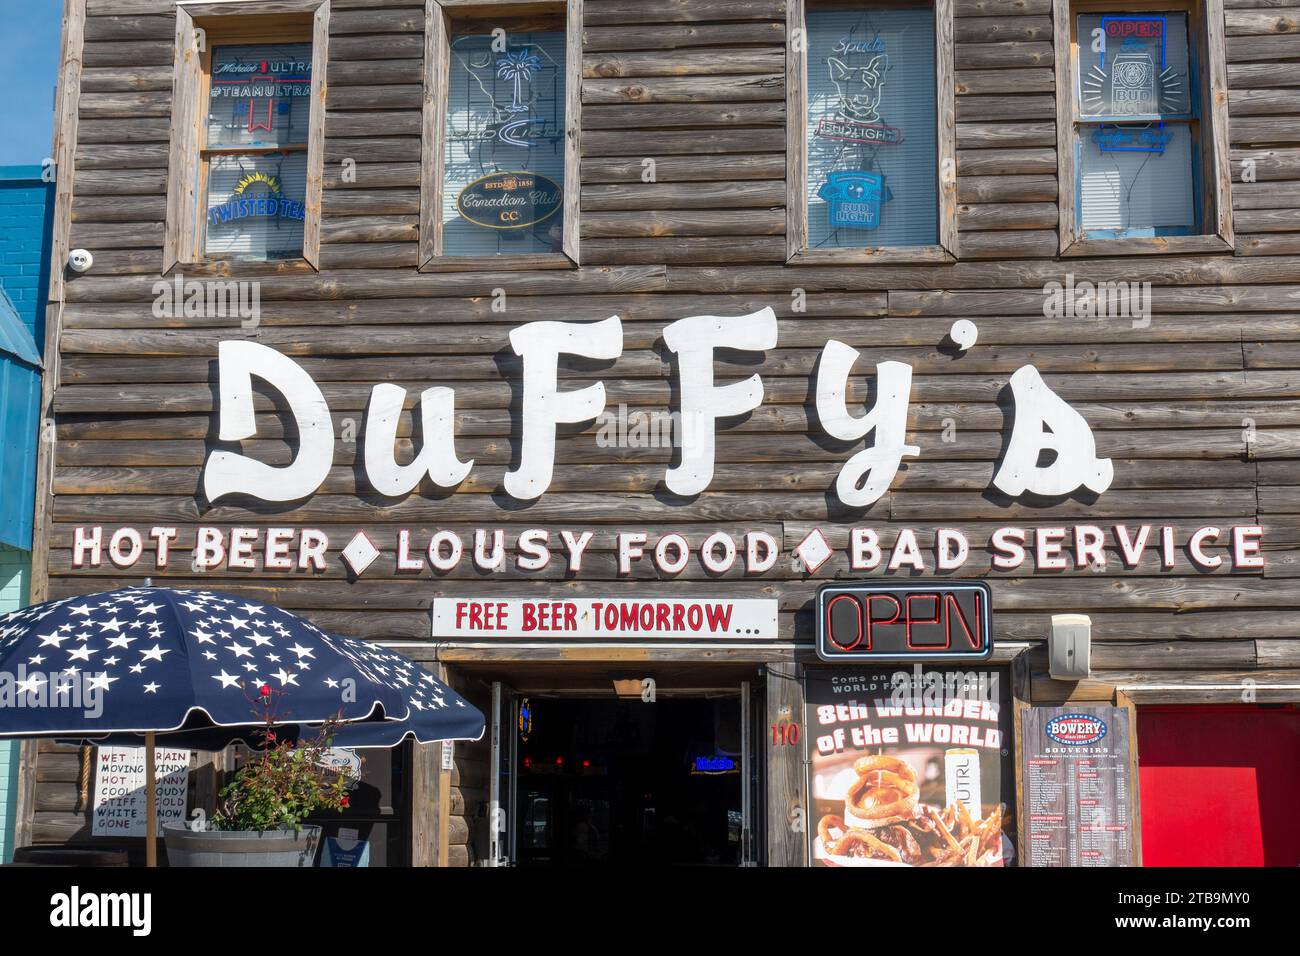 Duffy's Tavern Sign Part Of The Bowery Music Venue  Myrtle Beach, South Carolina United States Stock Photo